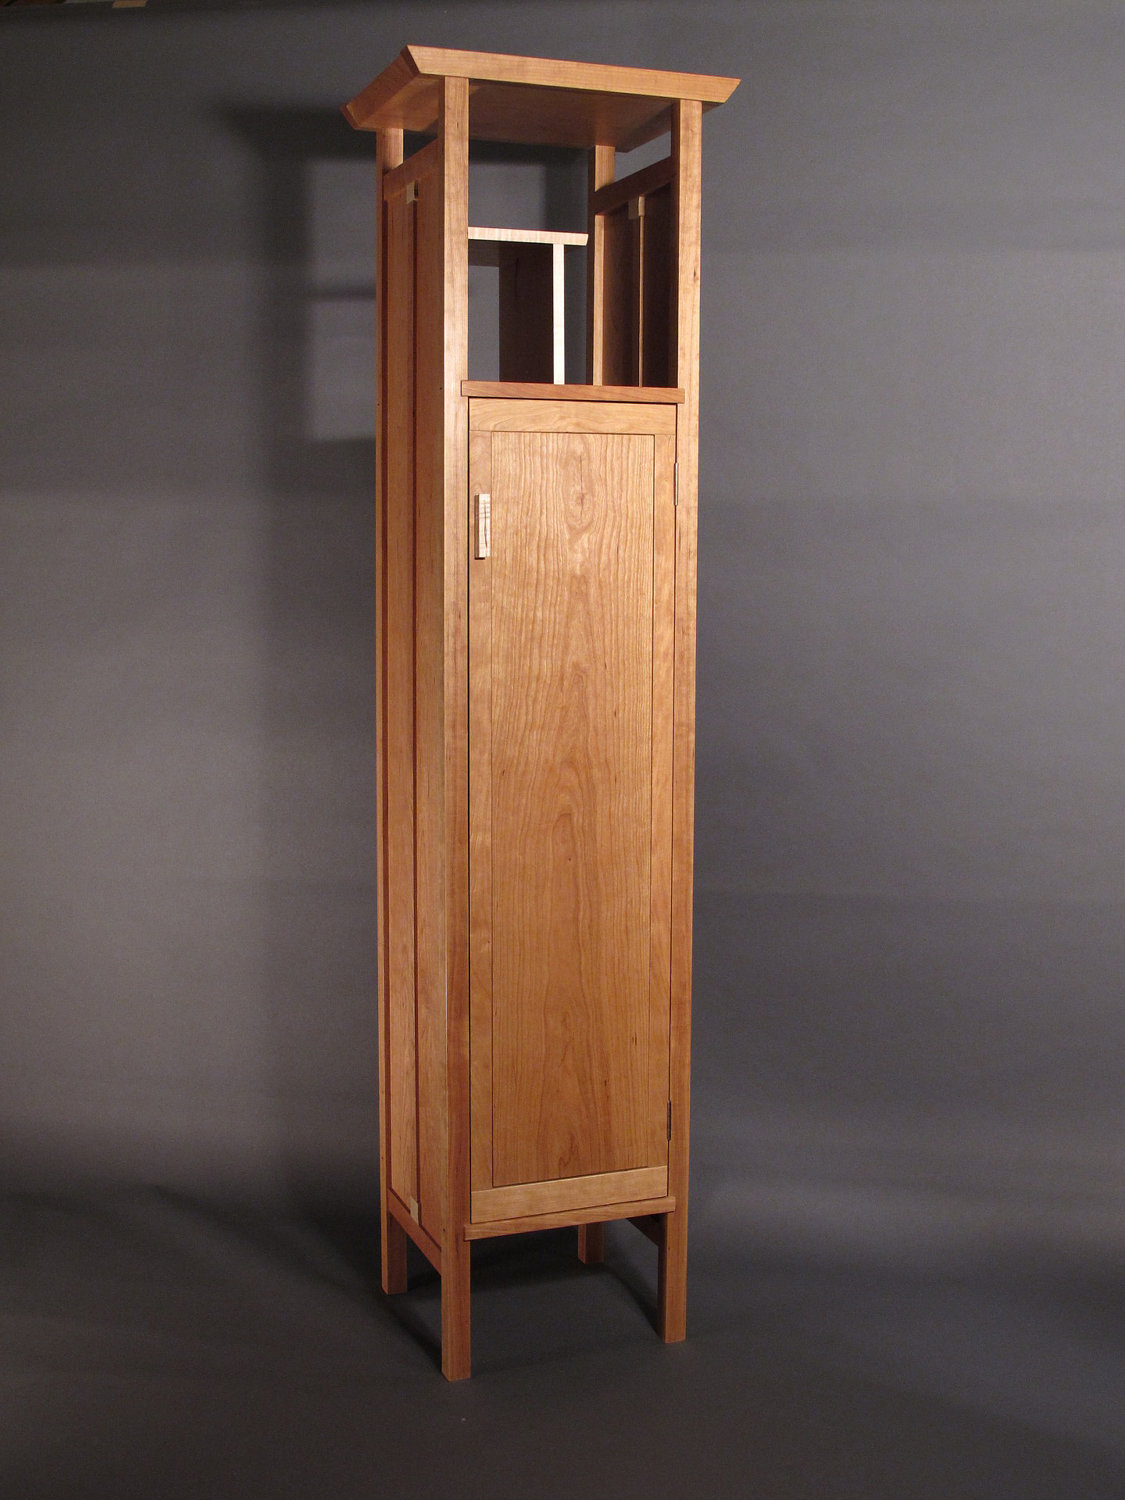 Tall narrow armoire cabinet in cherry